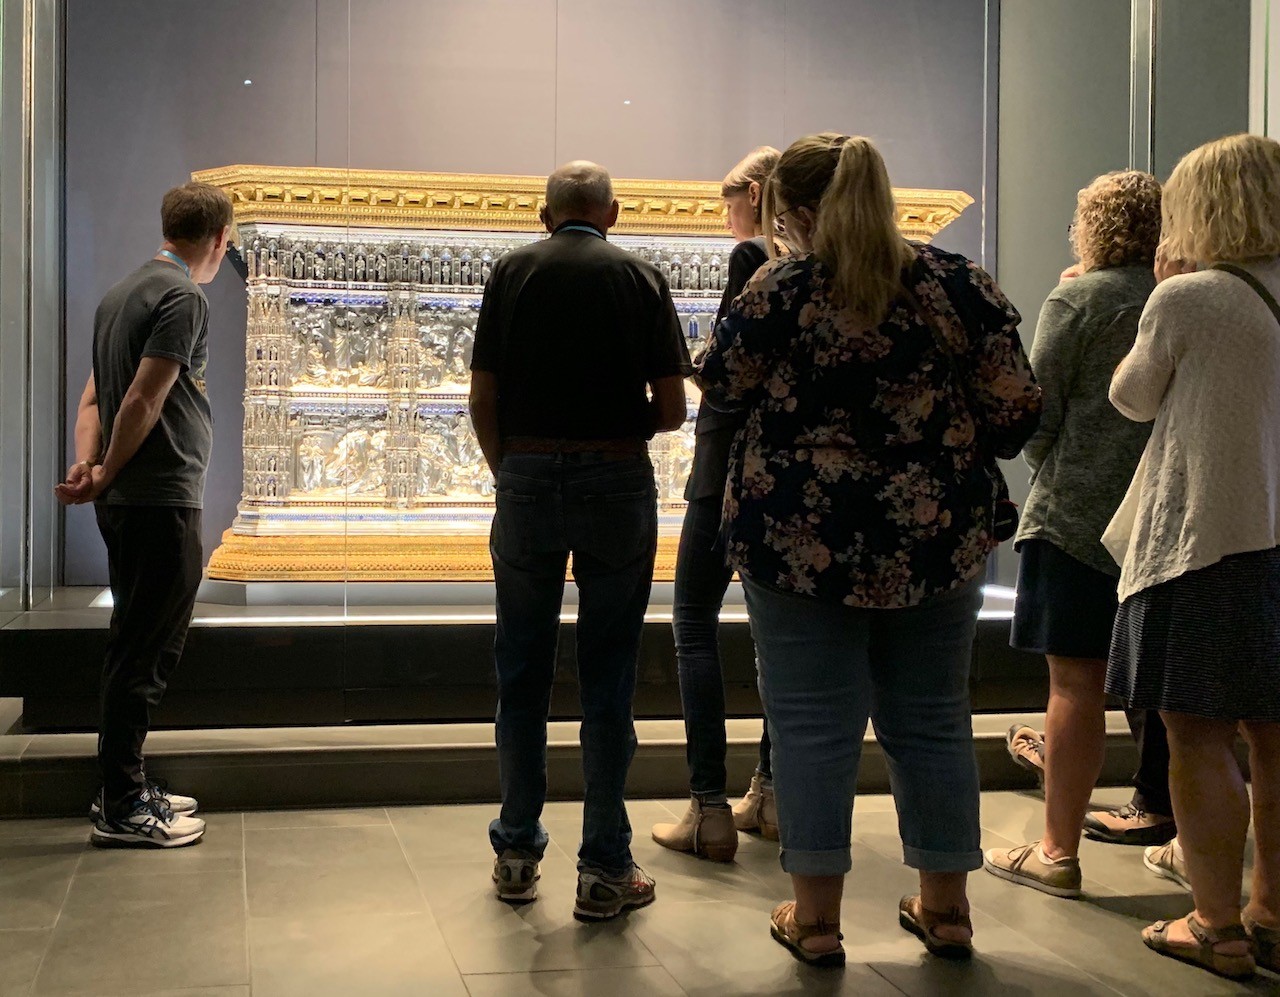 2019 - Day 7 in Duomo Museum